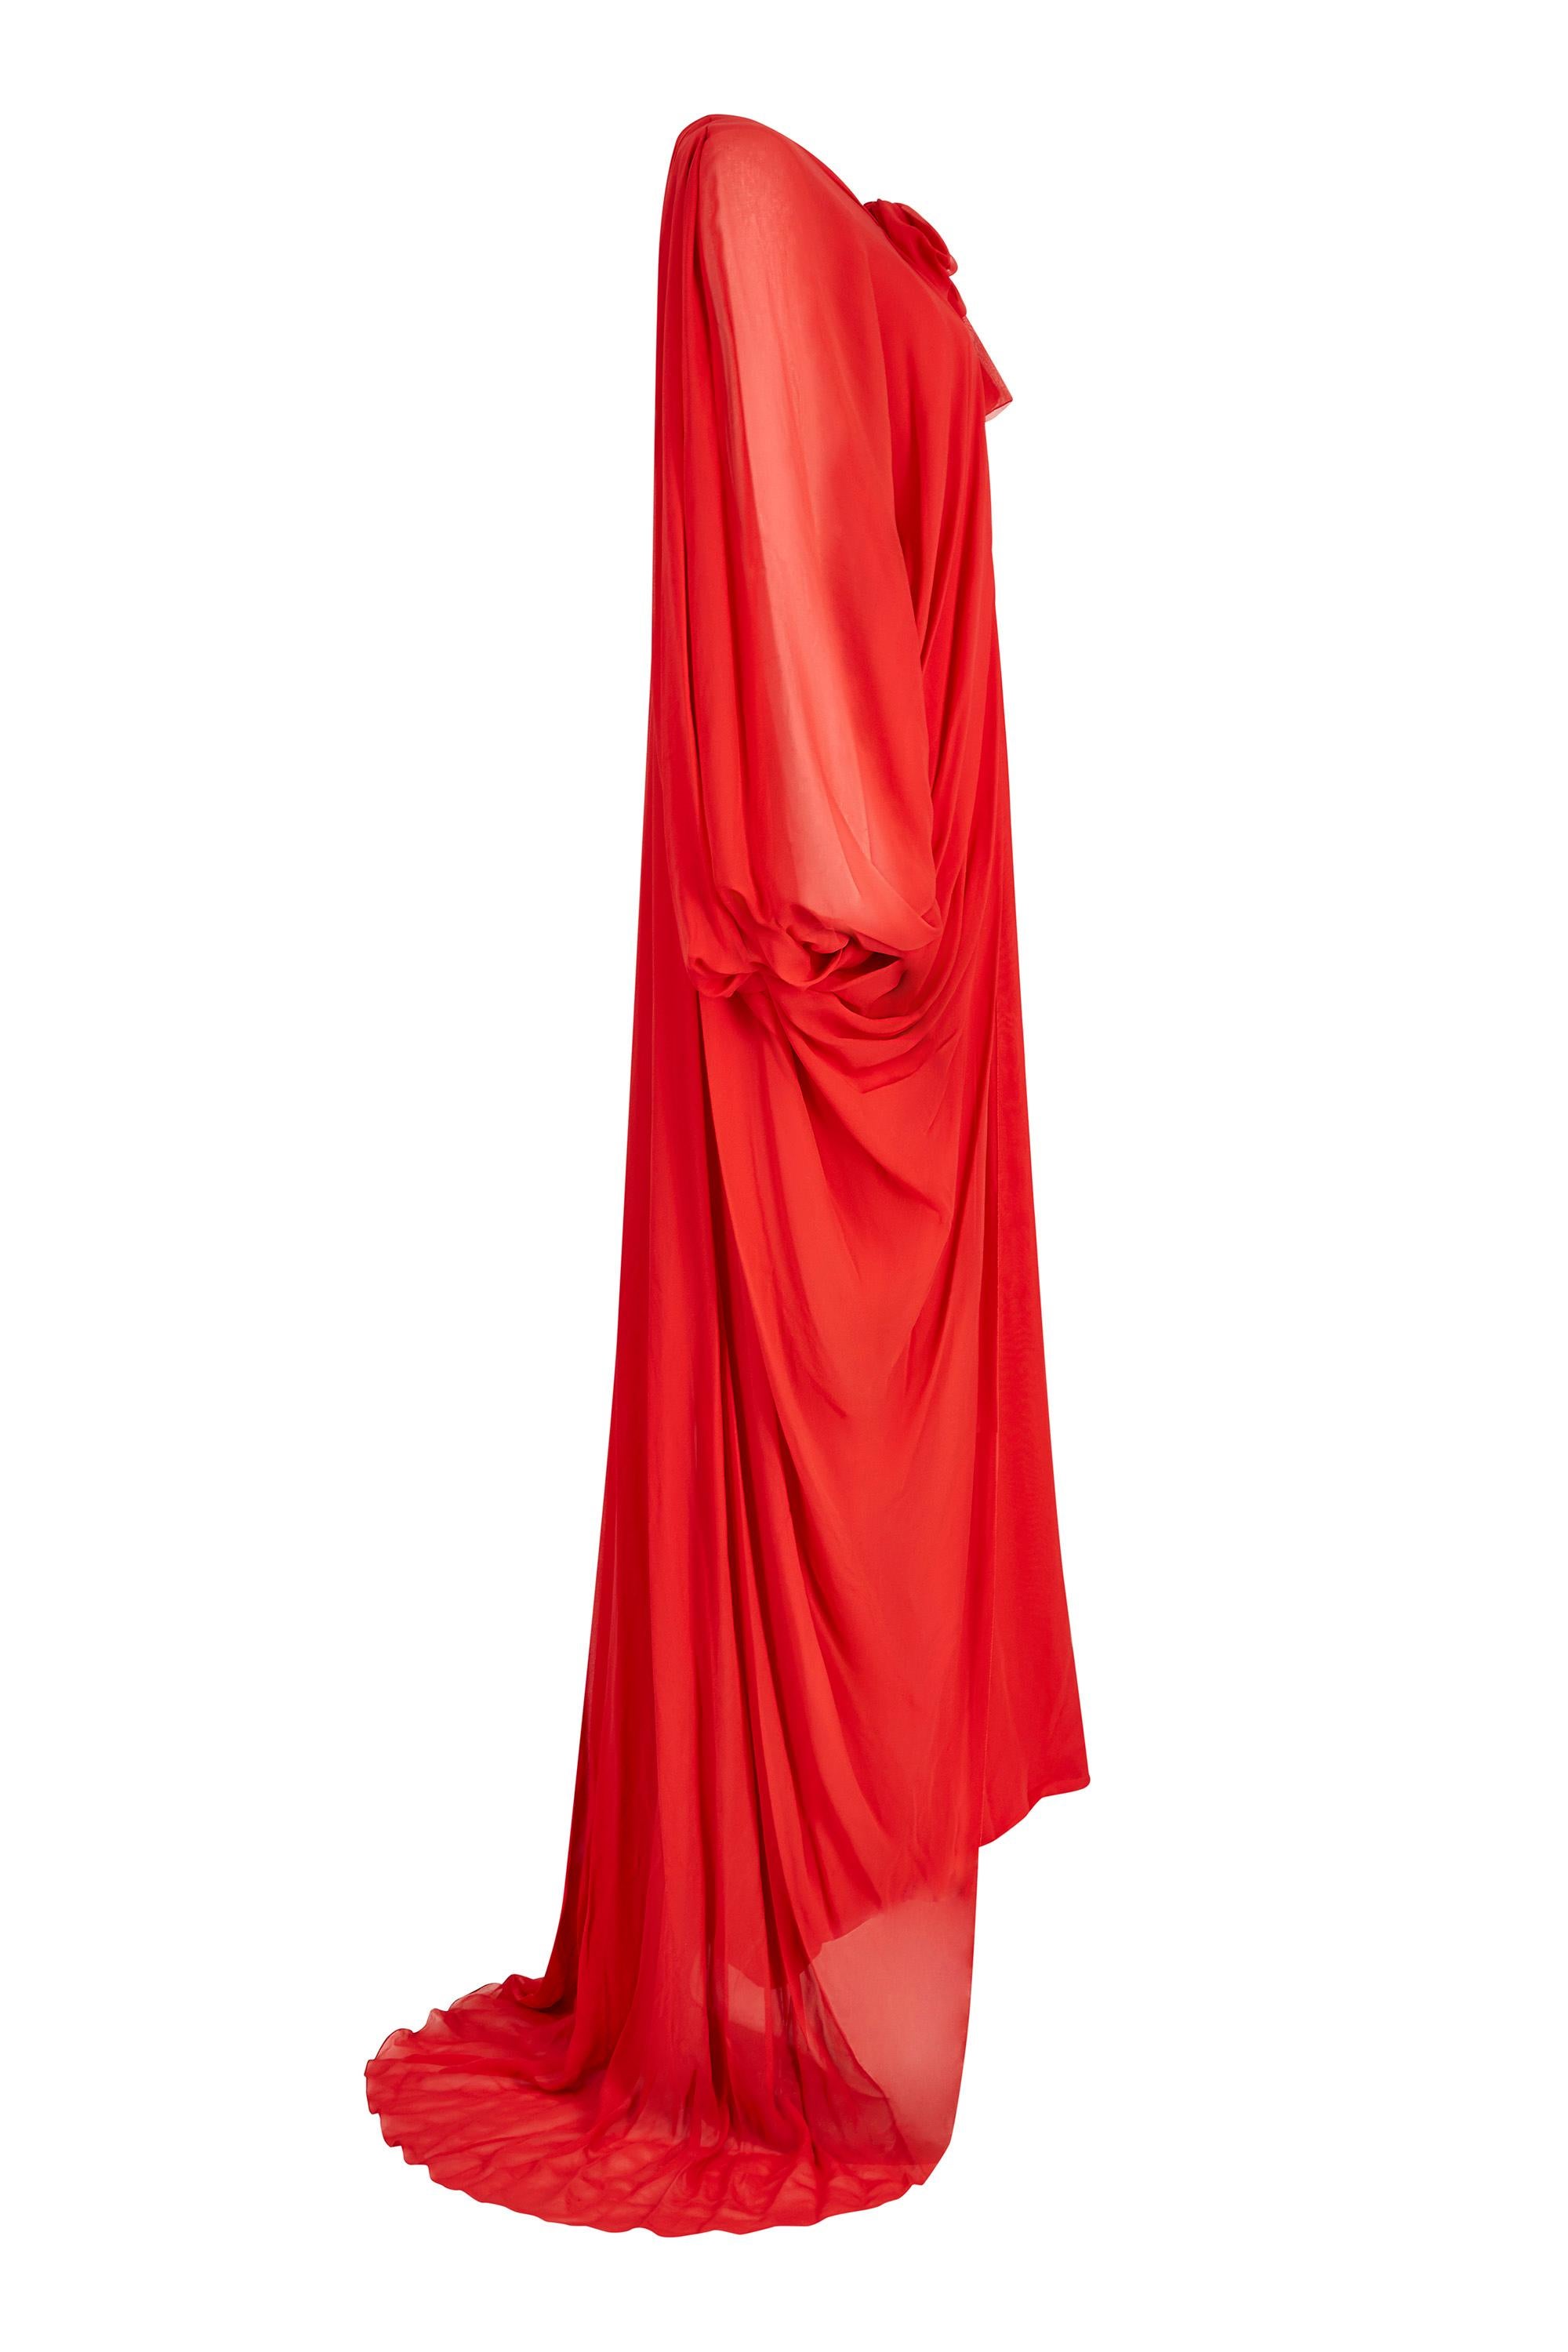 This sensational demi couture 1970s red silk chiffon evening gown is by iconic brand Christian Dior when celebrated designer Marc Bohan was at the helm. This show stopping piece is comprised of a silk lined chiffon slip and floor length chiffon